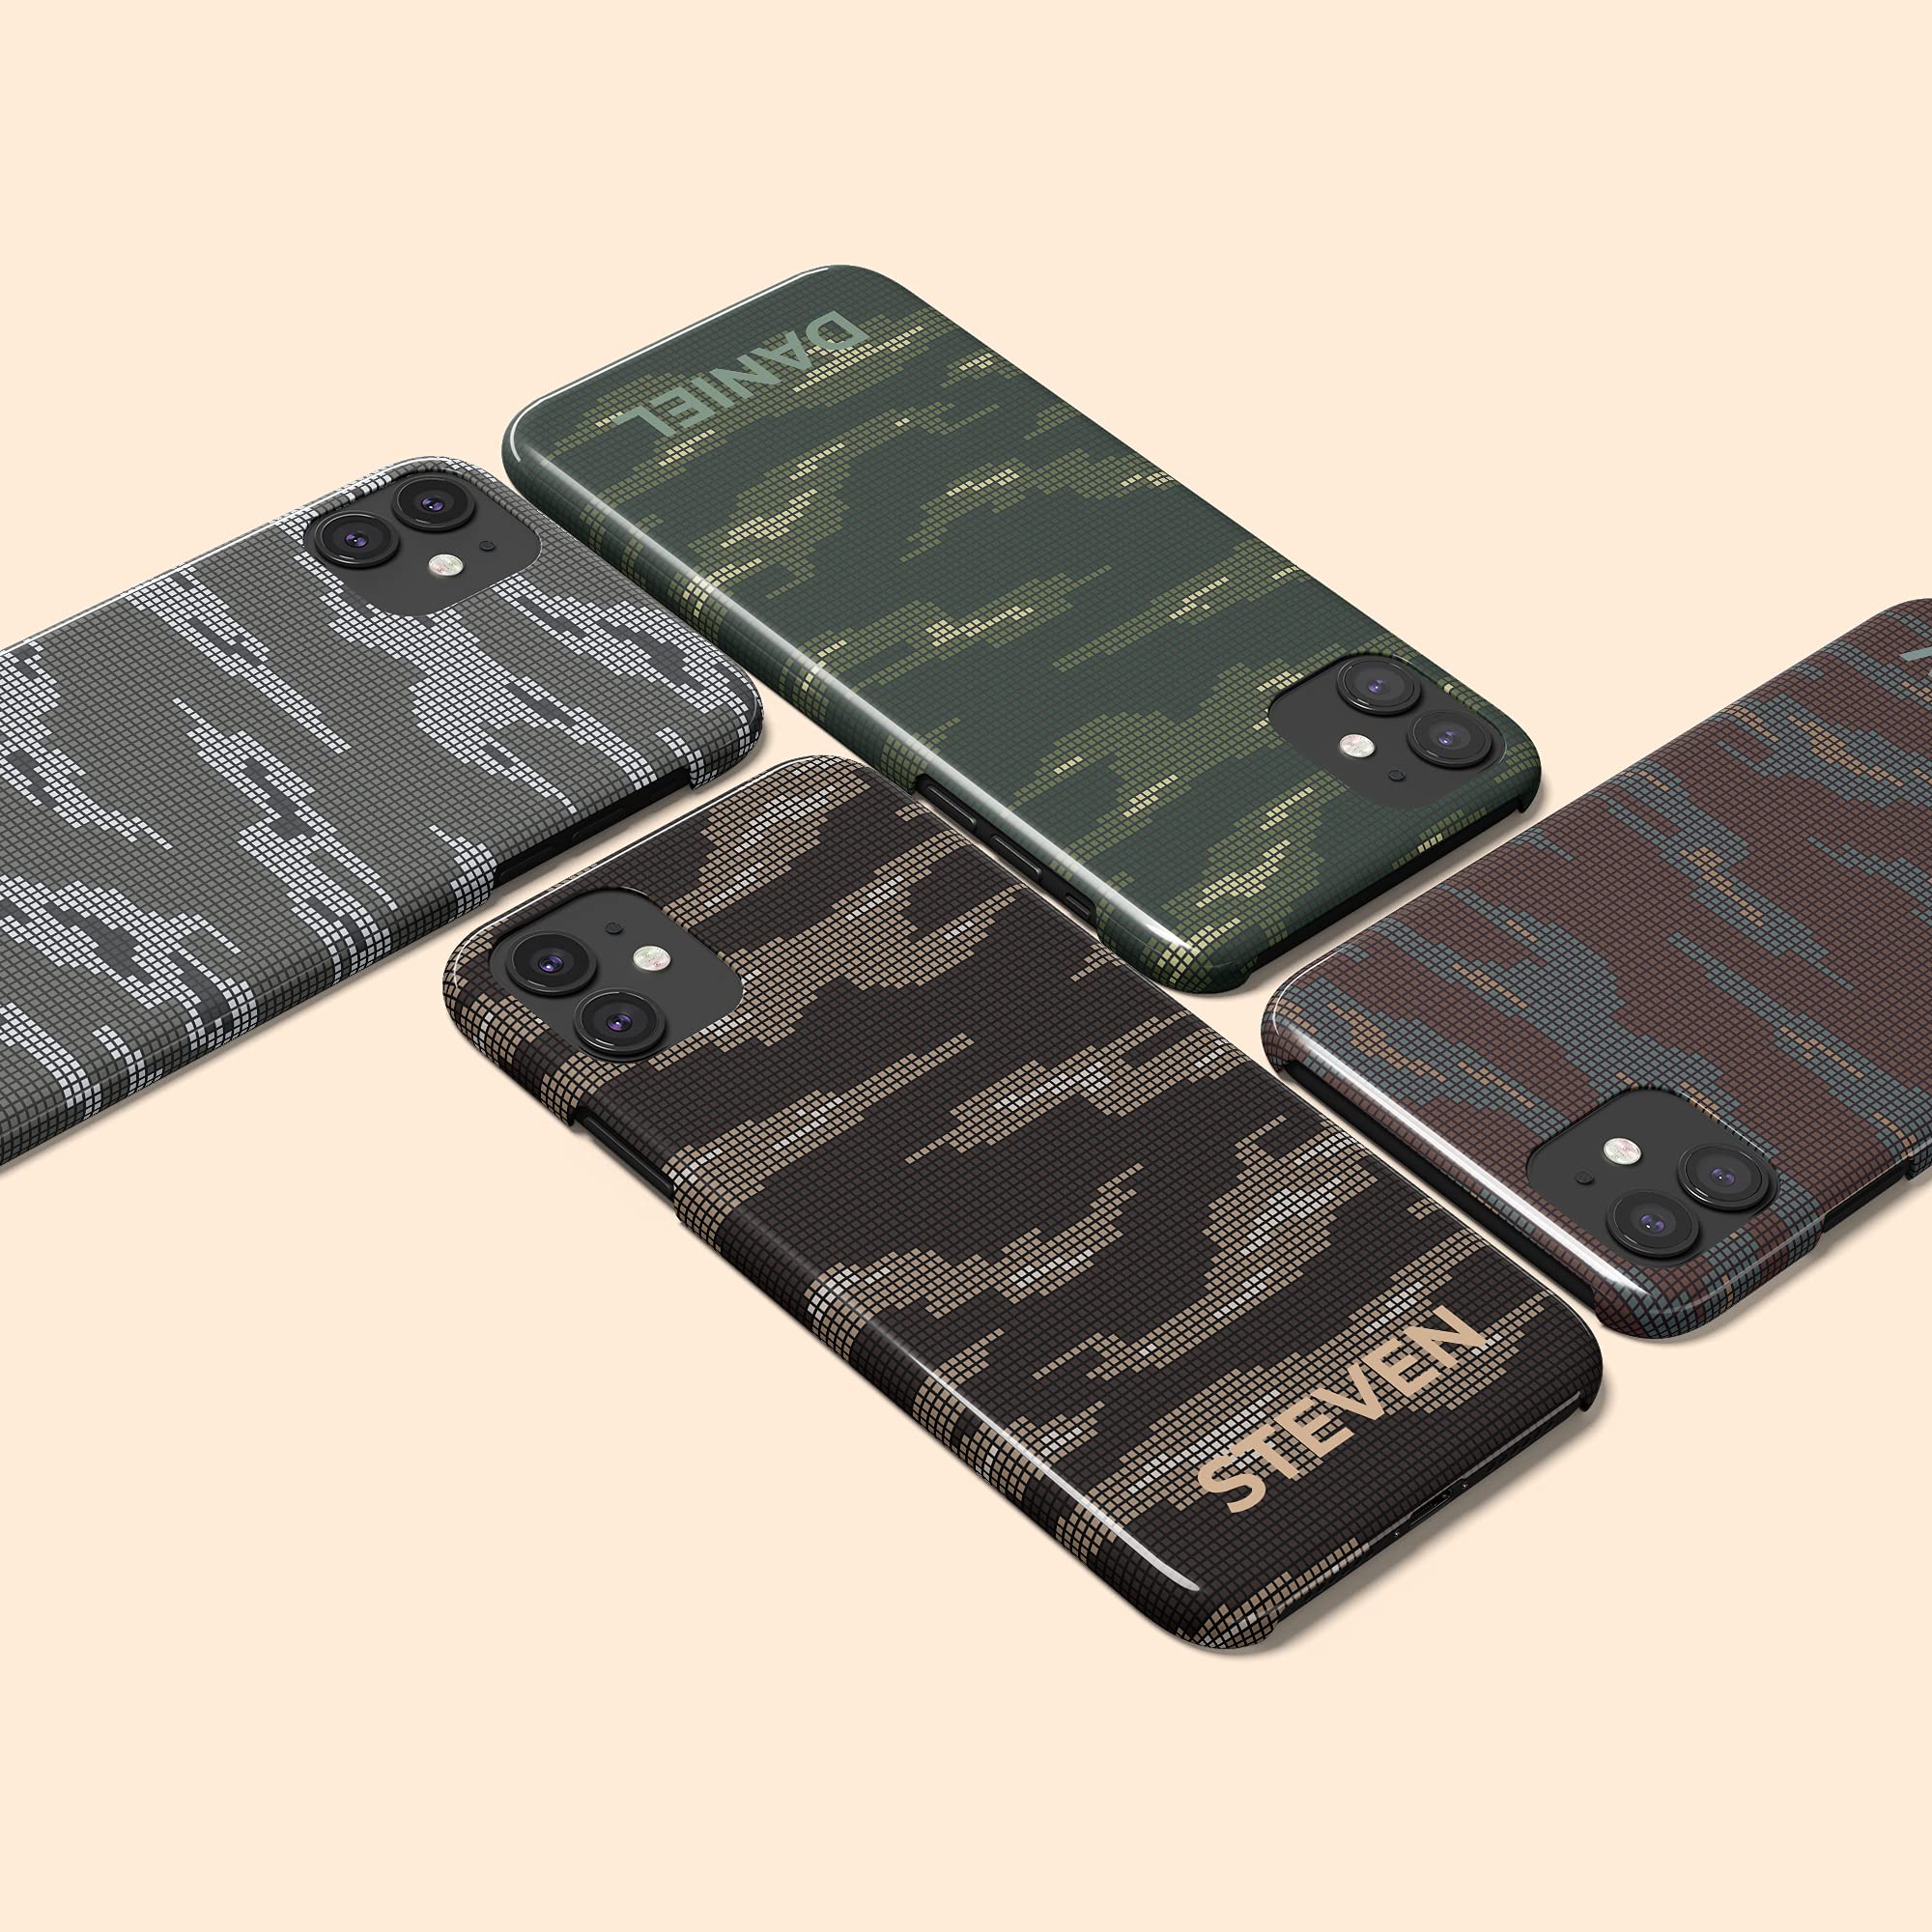 Artisticases Custom Name Digital Camo Case for Men, Personalized Name Case, Designed for iPhone 14 Plus, iPhone 13 Pro Max, iPhone 12 Mini, iPhone 11, iPhone X/XS Max, iPhone ‎XR, iPhone 7/8‎